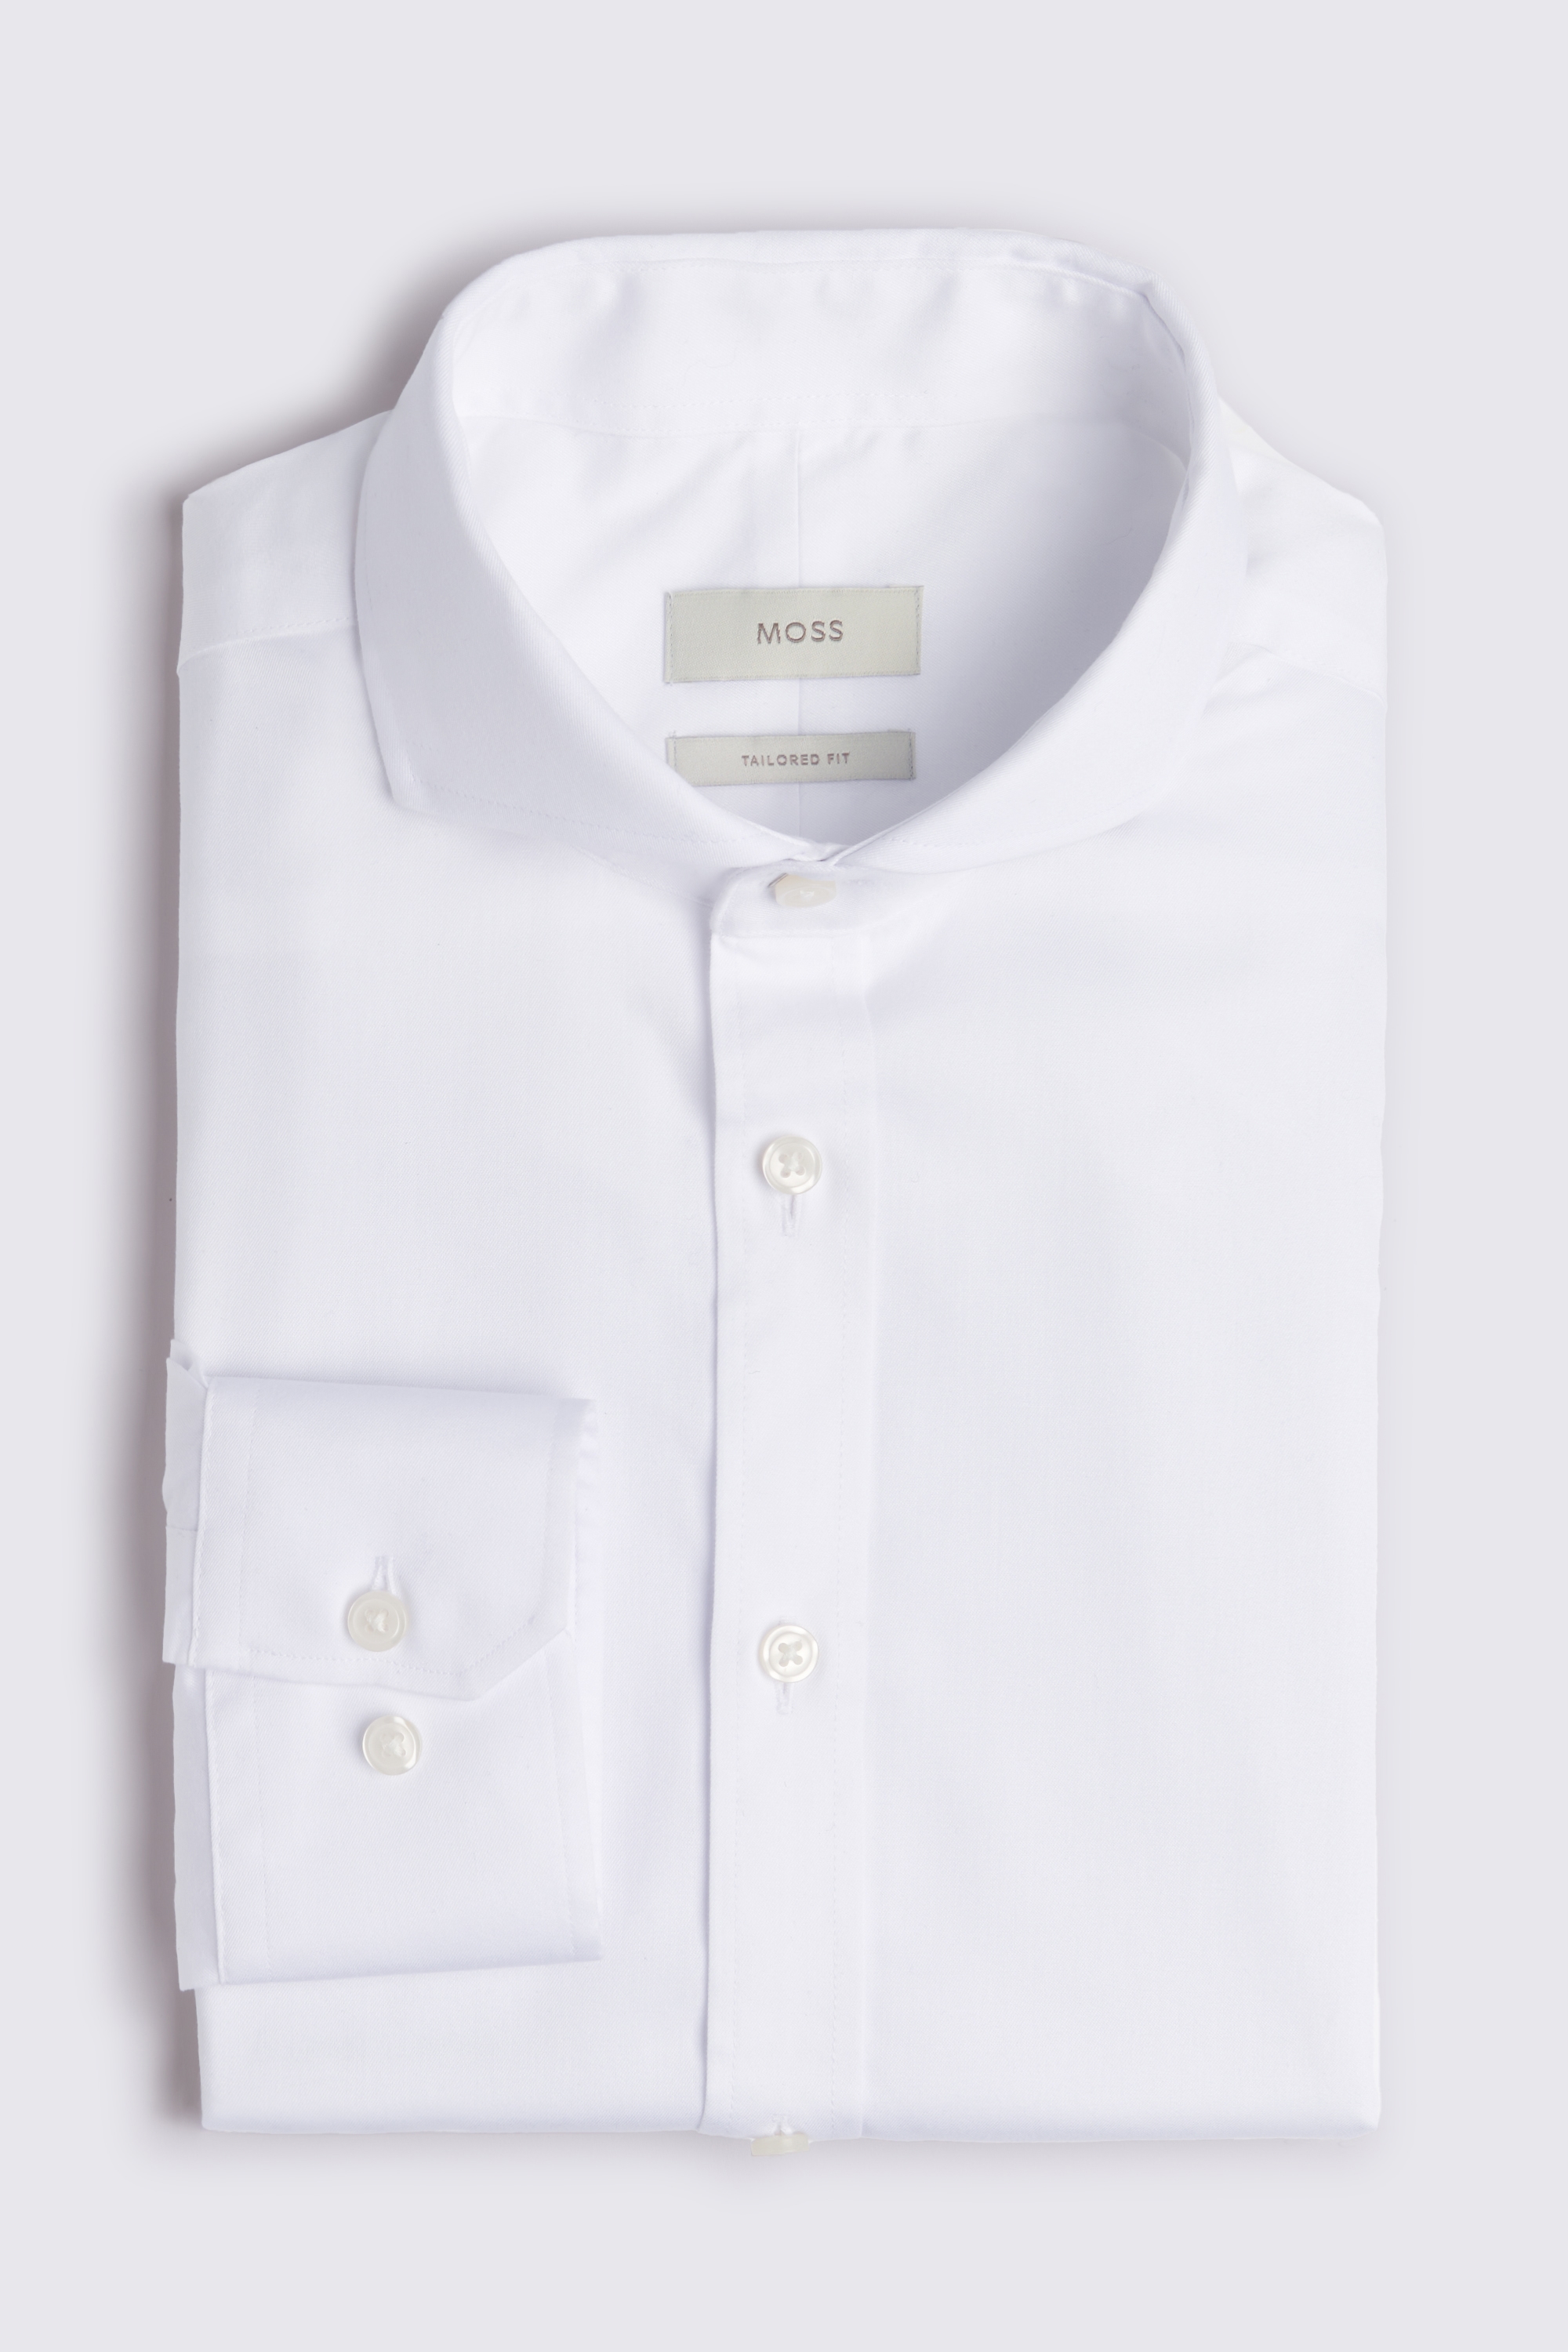 Tailored Fit White Non-Iron Shirt | Buy Online at Moss